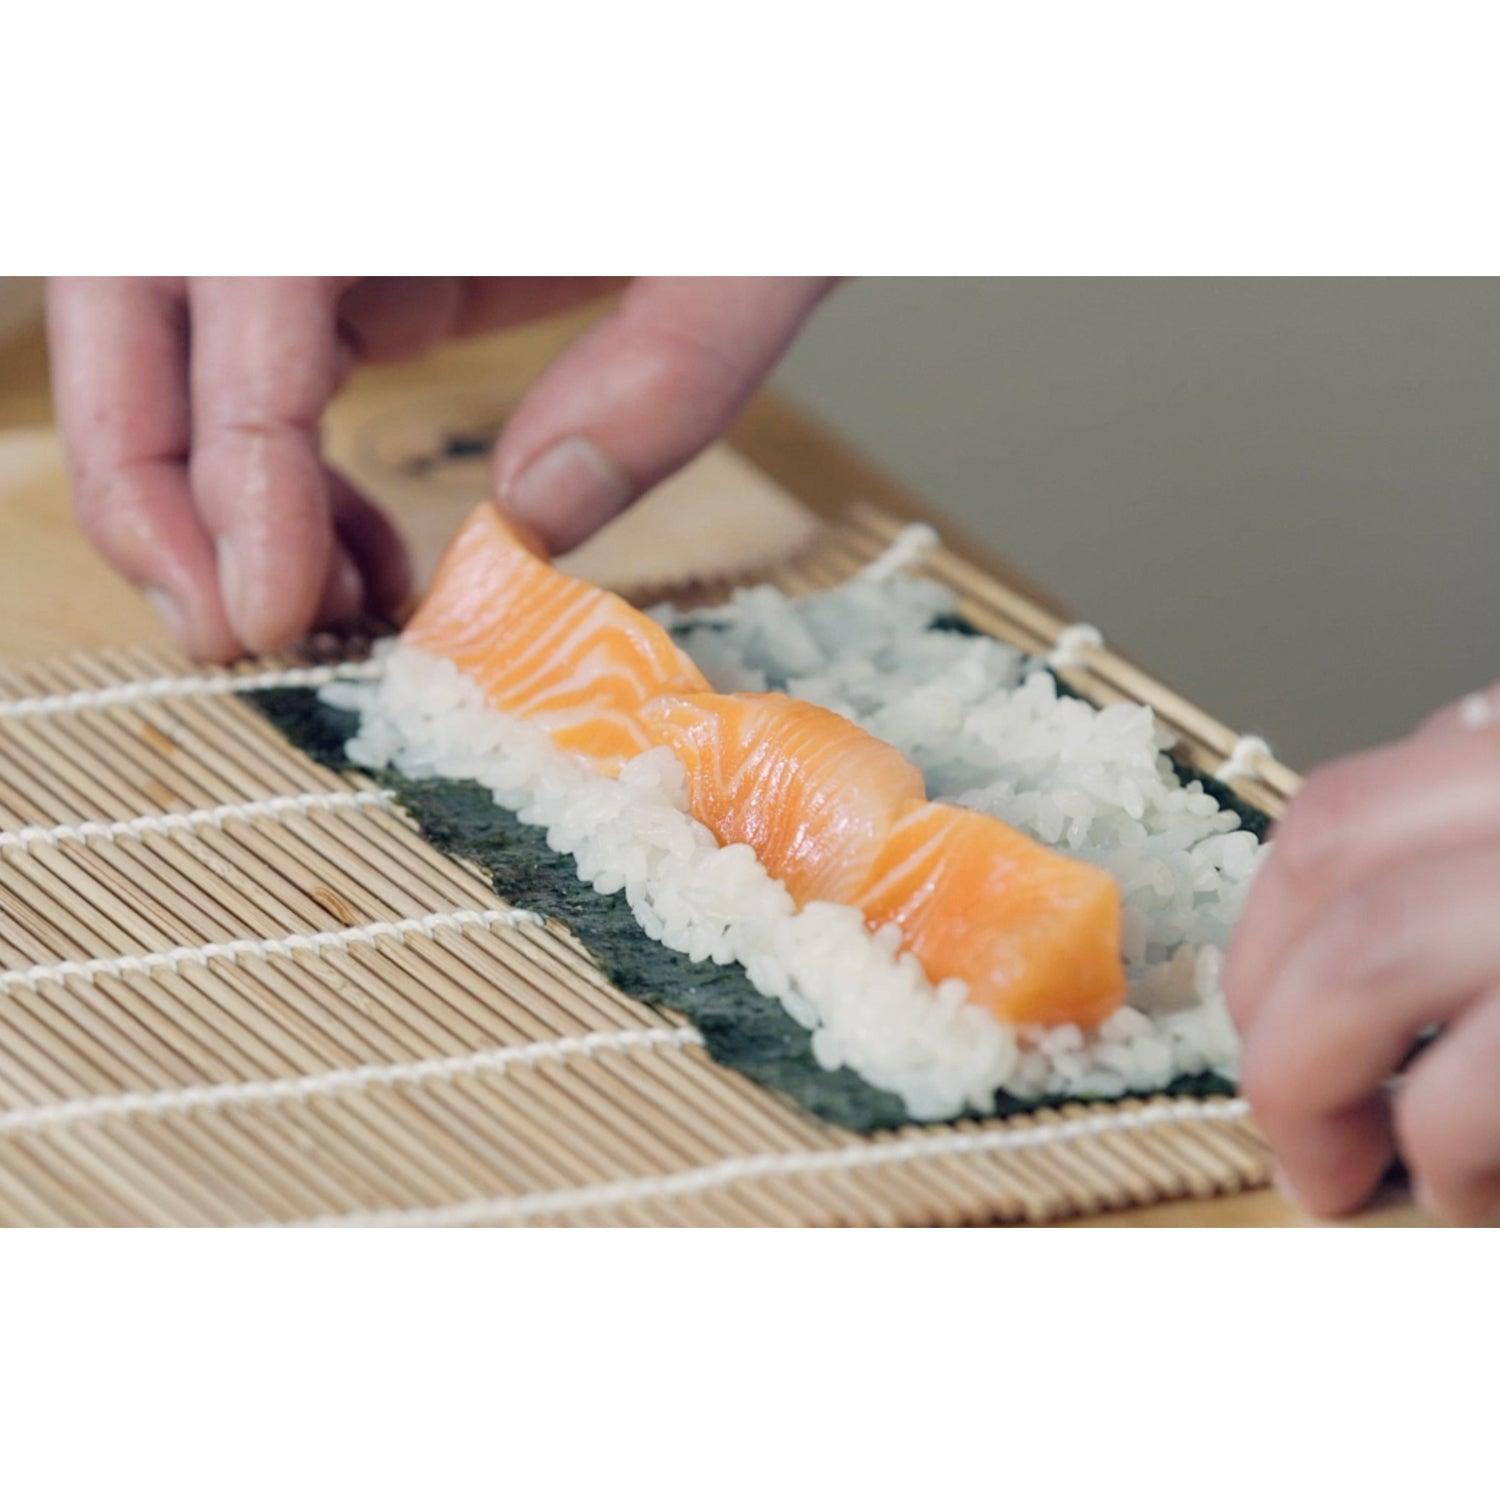 aya Sushi Making Kit Bamboo Kit 2, Complete with Sushi Chef Knife, Online  Video Tutorials, 2 Rolling Mats, Paddle, Spreader, 5 Pairs of Fiberglass